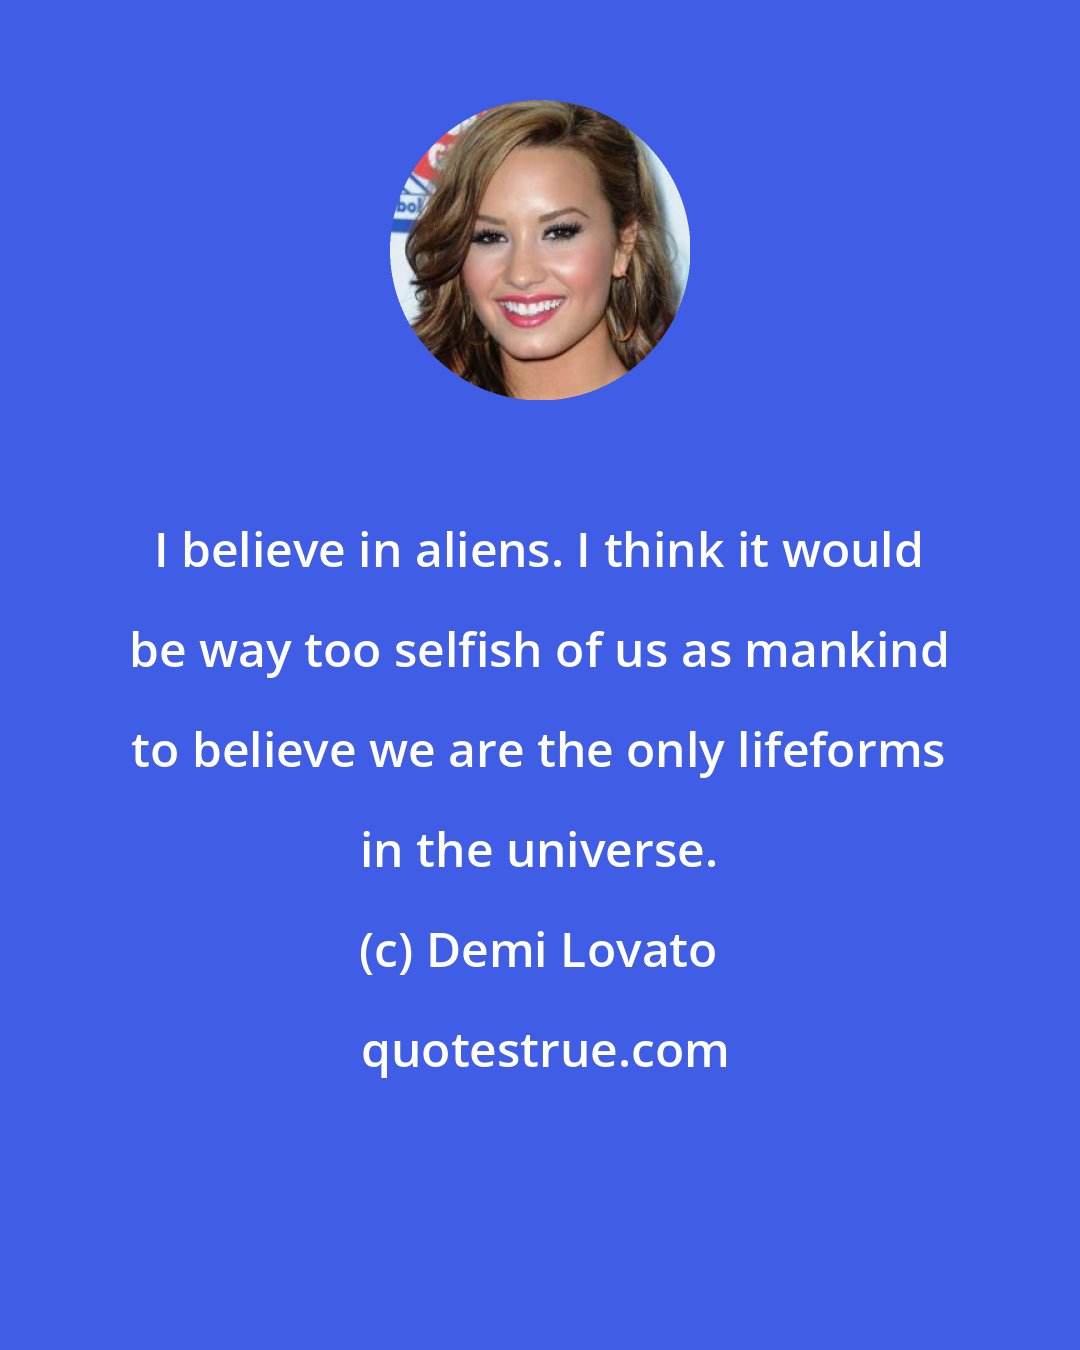 Demi Lovato: I believe in aliens. I think it would be way too selfish of us as mankind to believe we are the only lifeforms in the universe.